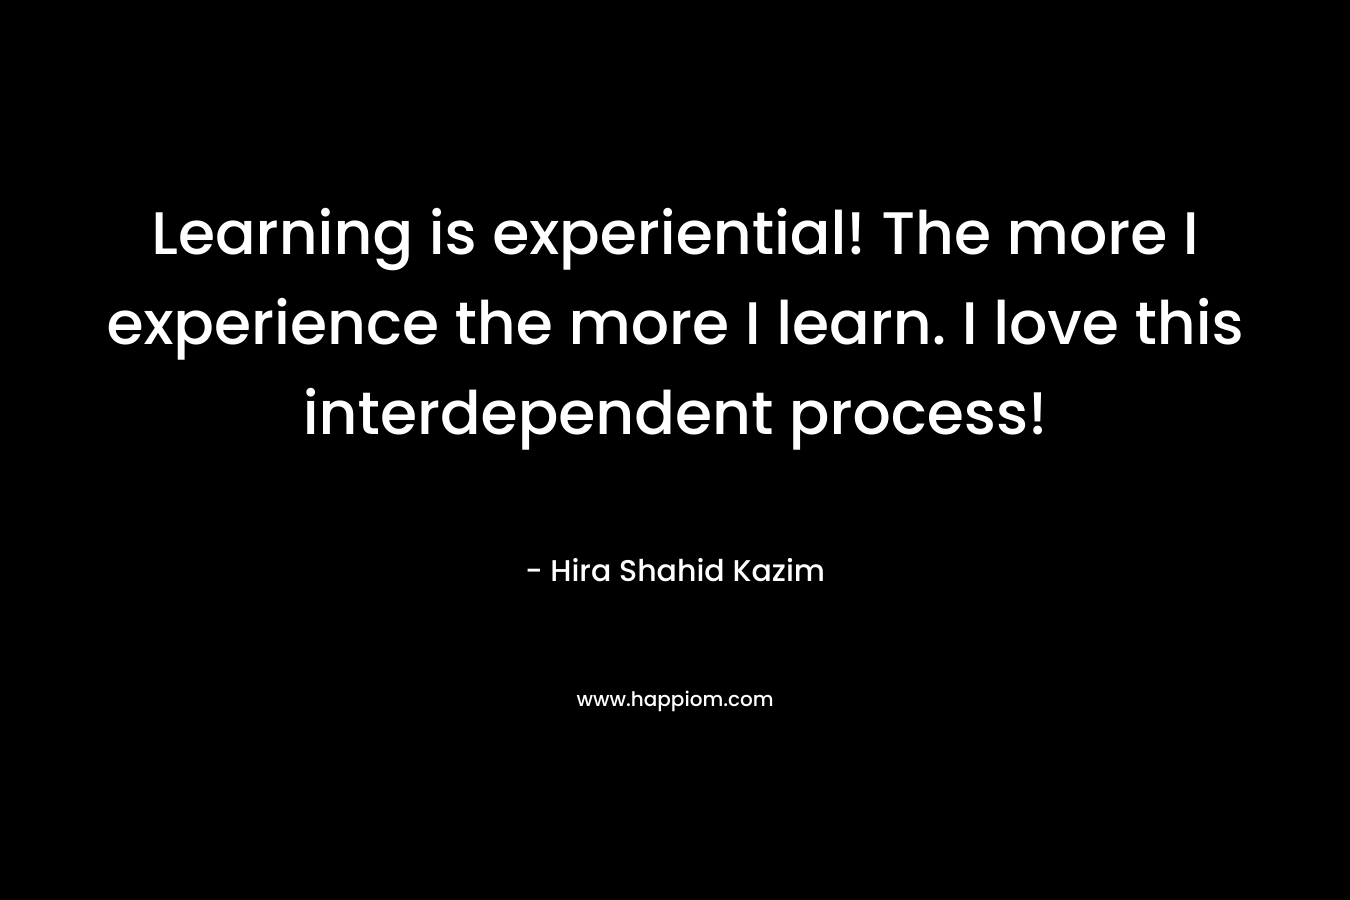 Learning is experiential! The more I experience the more I learn. I love this interdependent process!